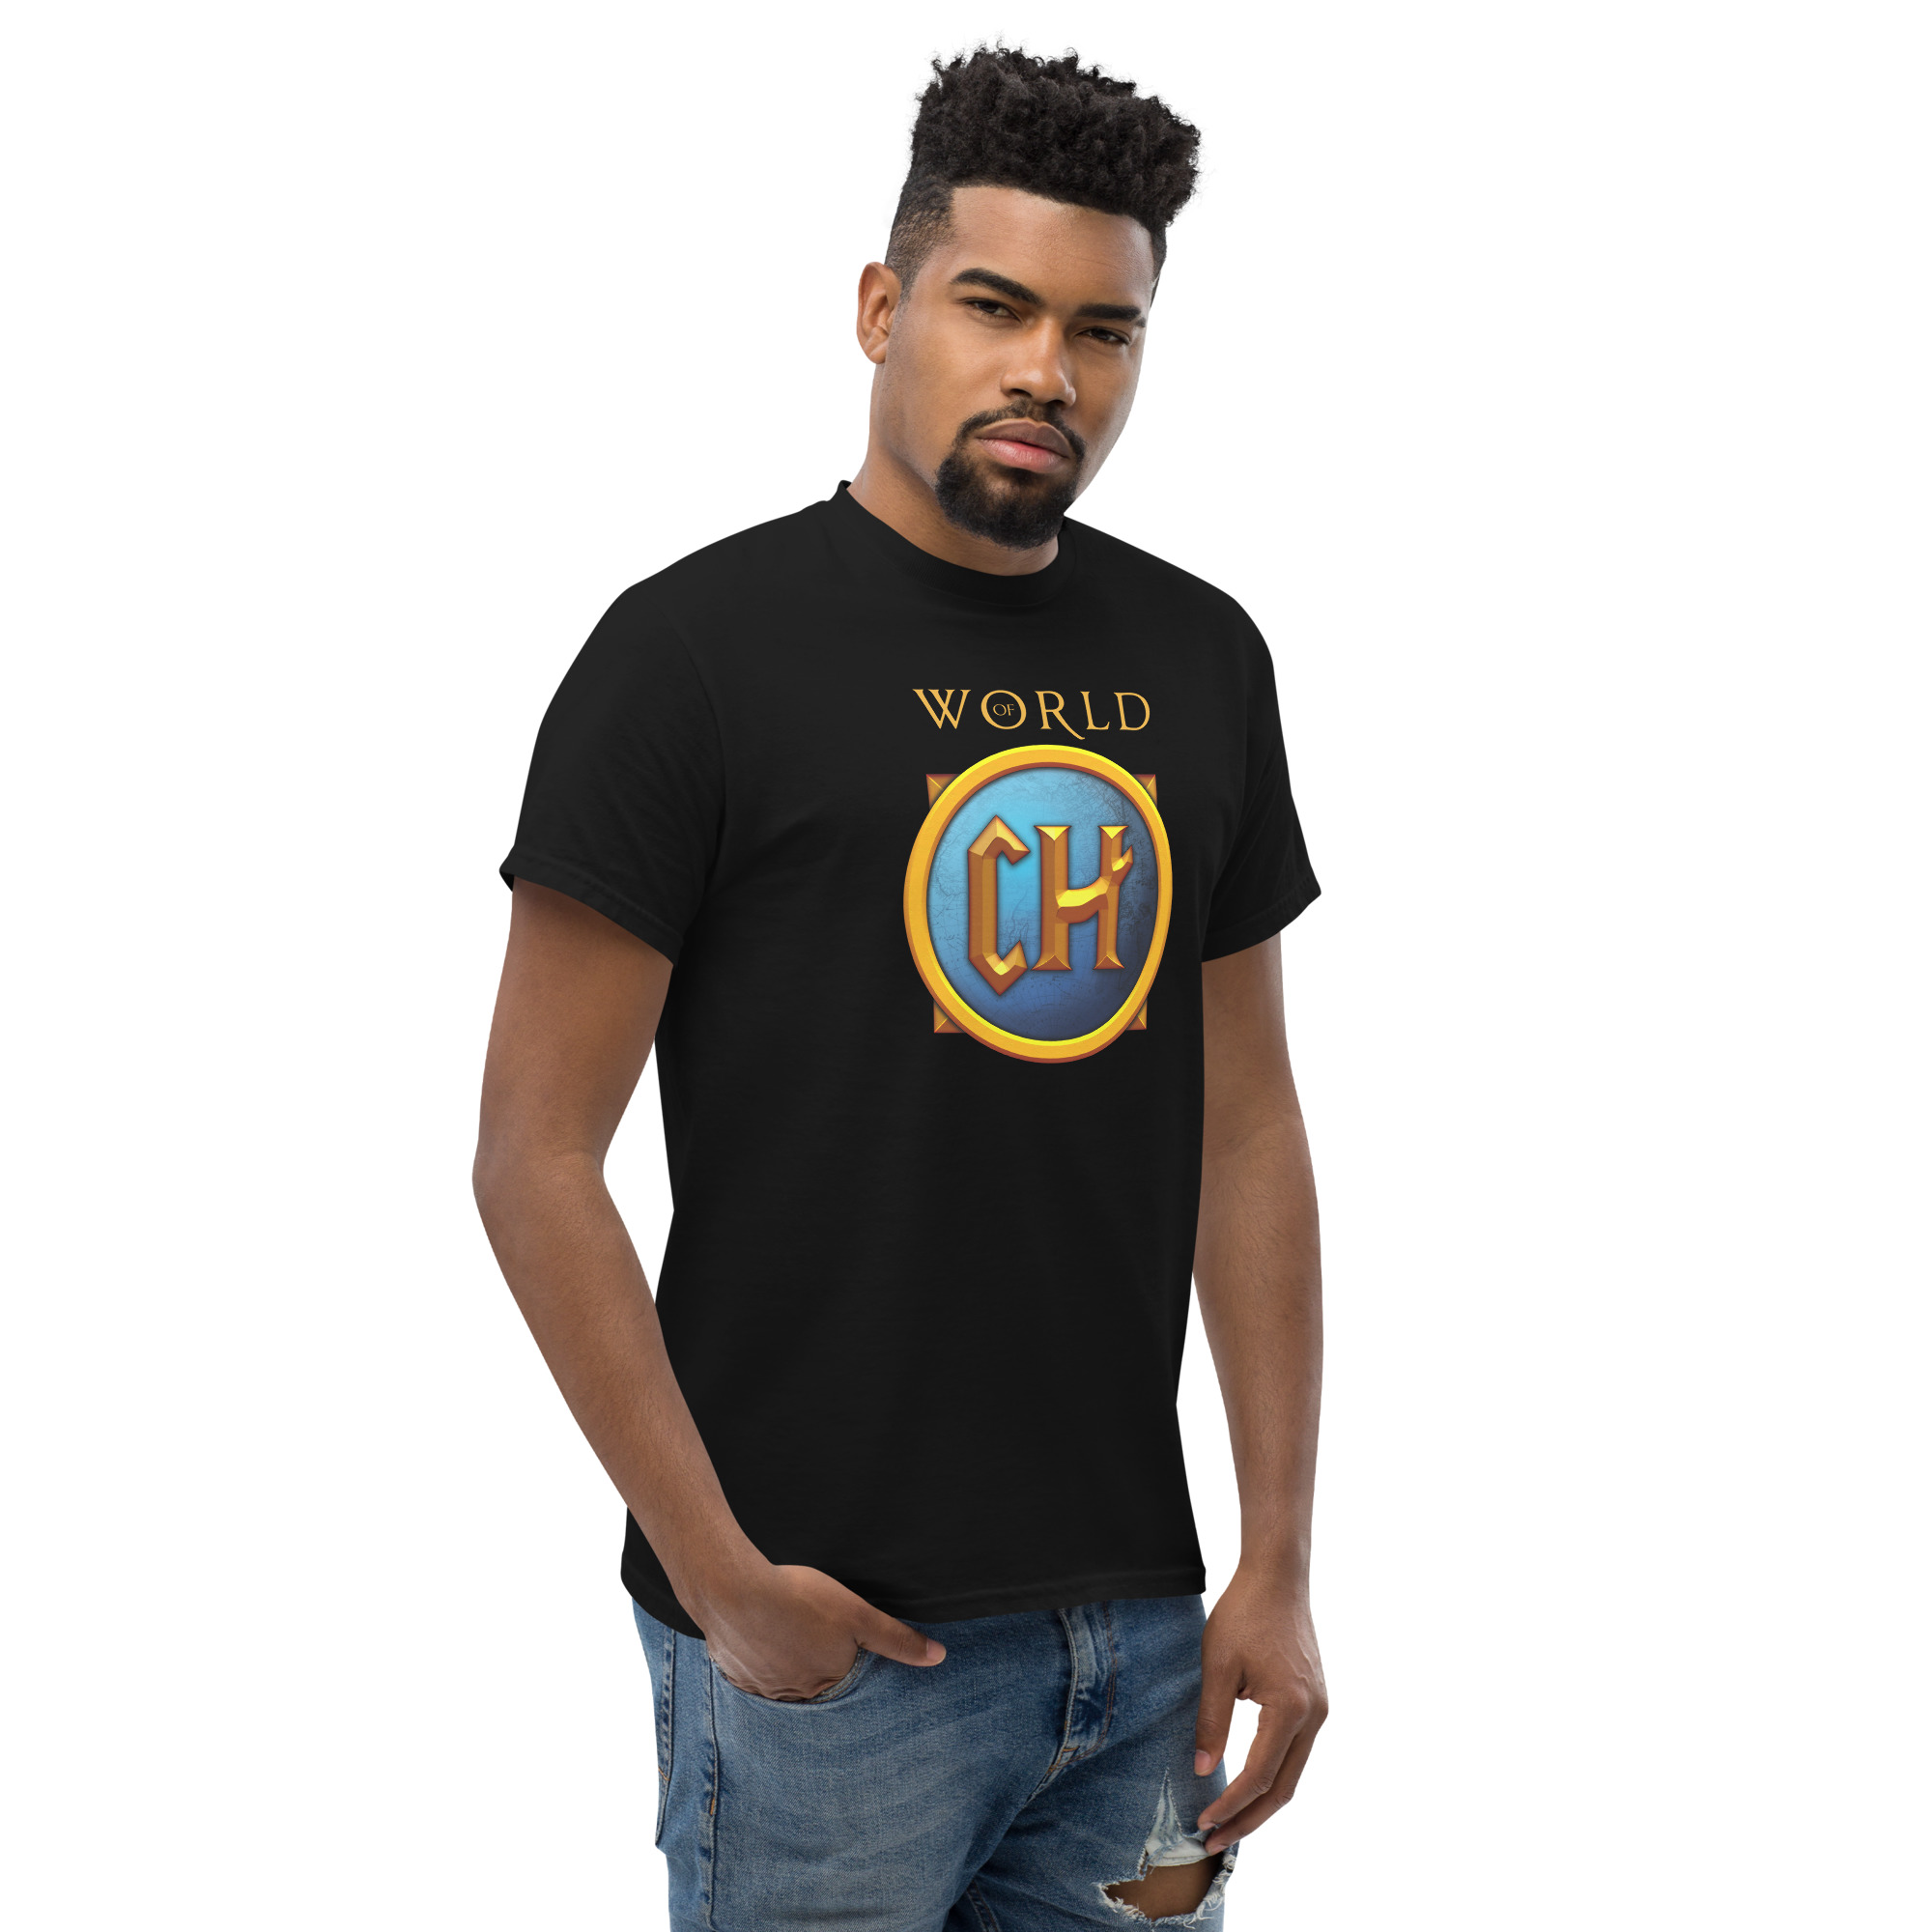 T-shirt – Gaming – World of CH Men's Clothing Wearyt